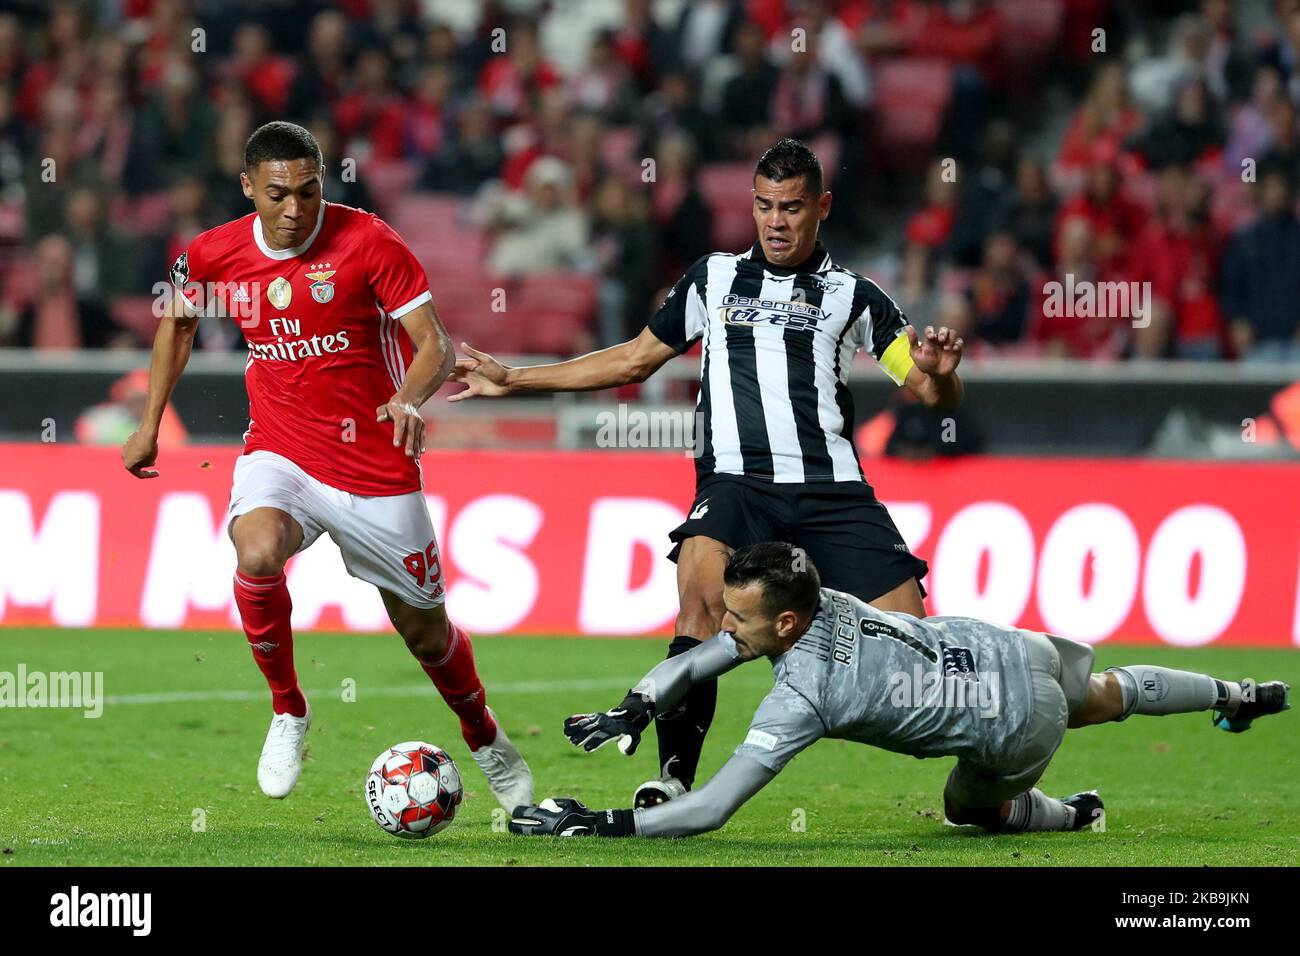 Vinicius of SL Benfica (L) vies with Jadson (C ) and Ricardo Ferreira of Portimonense SC (R ) during the Portuguese League football match between SL Benfica and Portimonense SC at the Luz stadium in Lisbon, Portugal on October 30, 2019. (Photo by Pedro FiÃºza/NurPhoto) Stock Photo